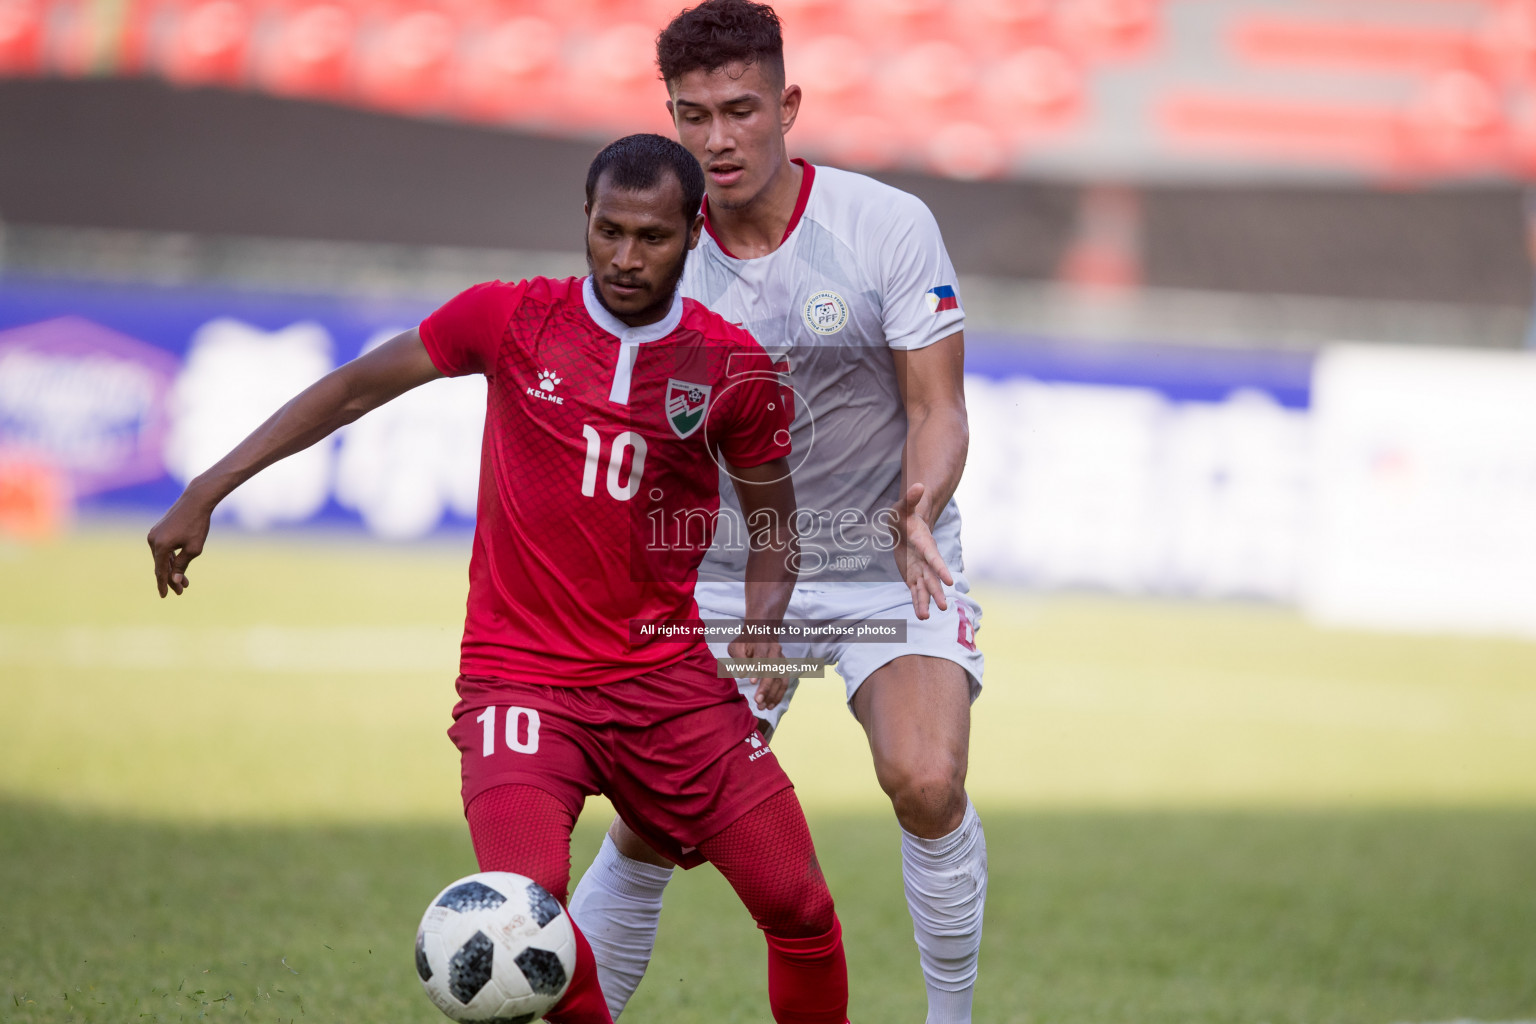 Maldives vs Philliphines  in FIFA World Cup Qatar 2022 & AFC Asian Cup China 2023 Qualifier on 14th November 2019 in Male, Maldives Photos: Ismail Thoriq/images.mv